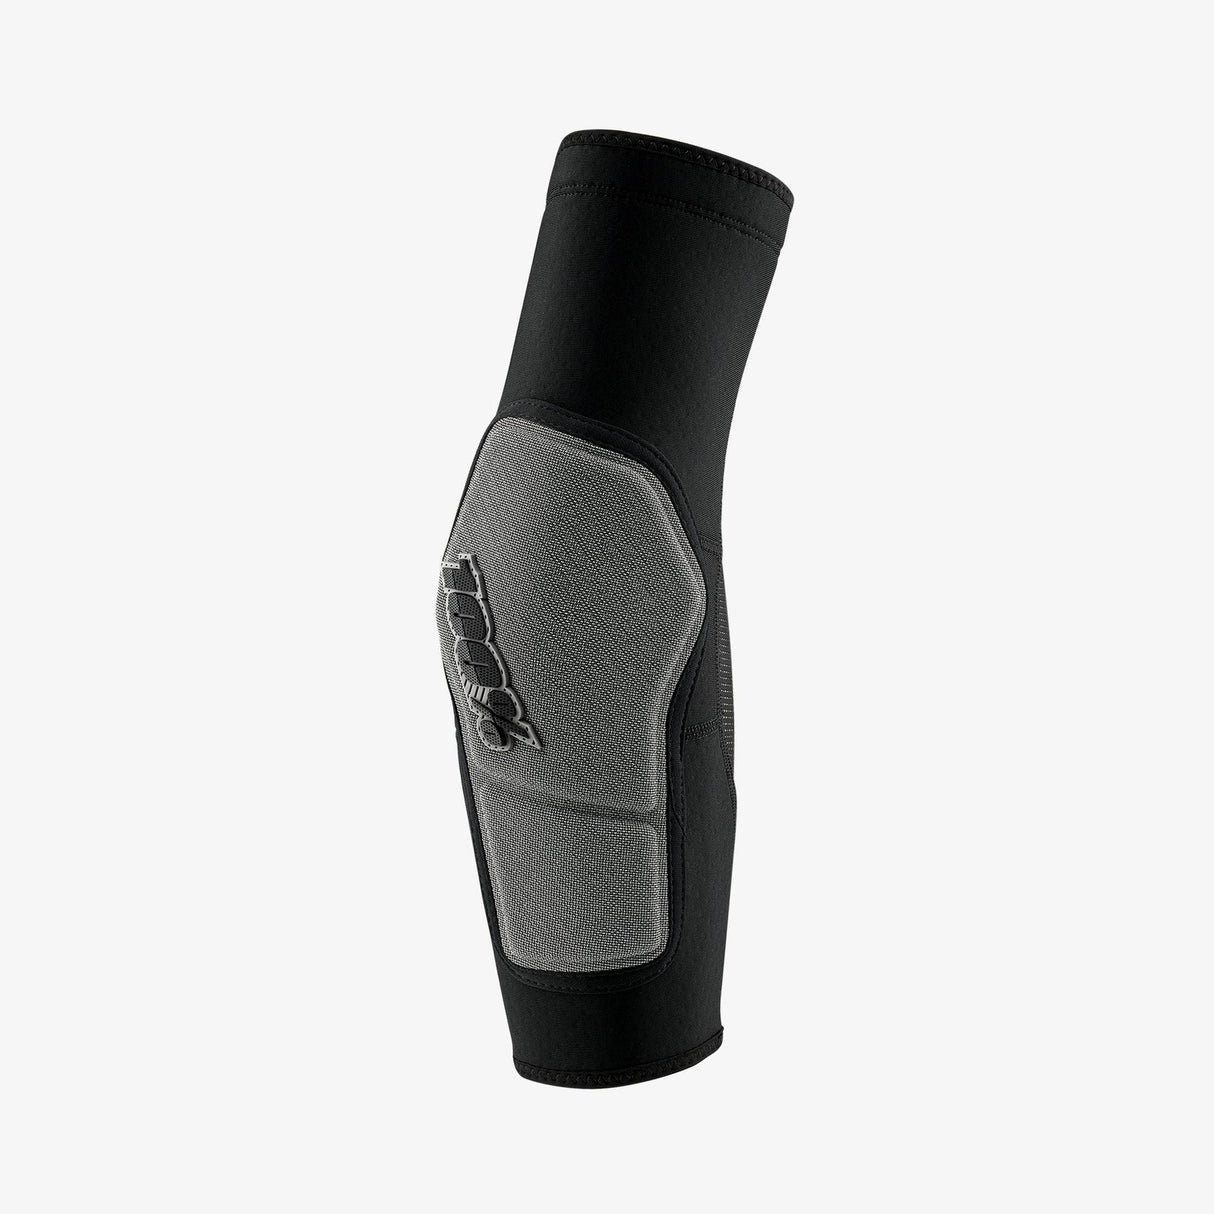 Ride 100% RIDECAMP Elbow Guards/Pads, Color: Black/Grey- Size XL Misc Full Catalog Ride 100%